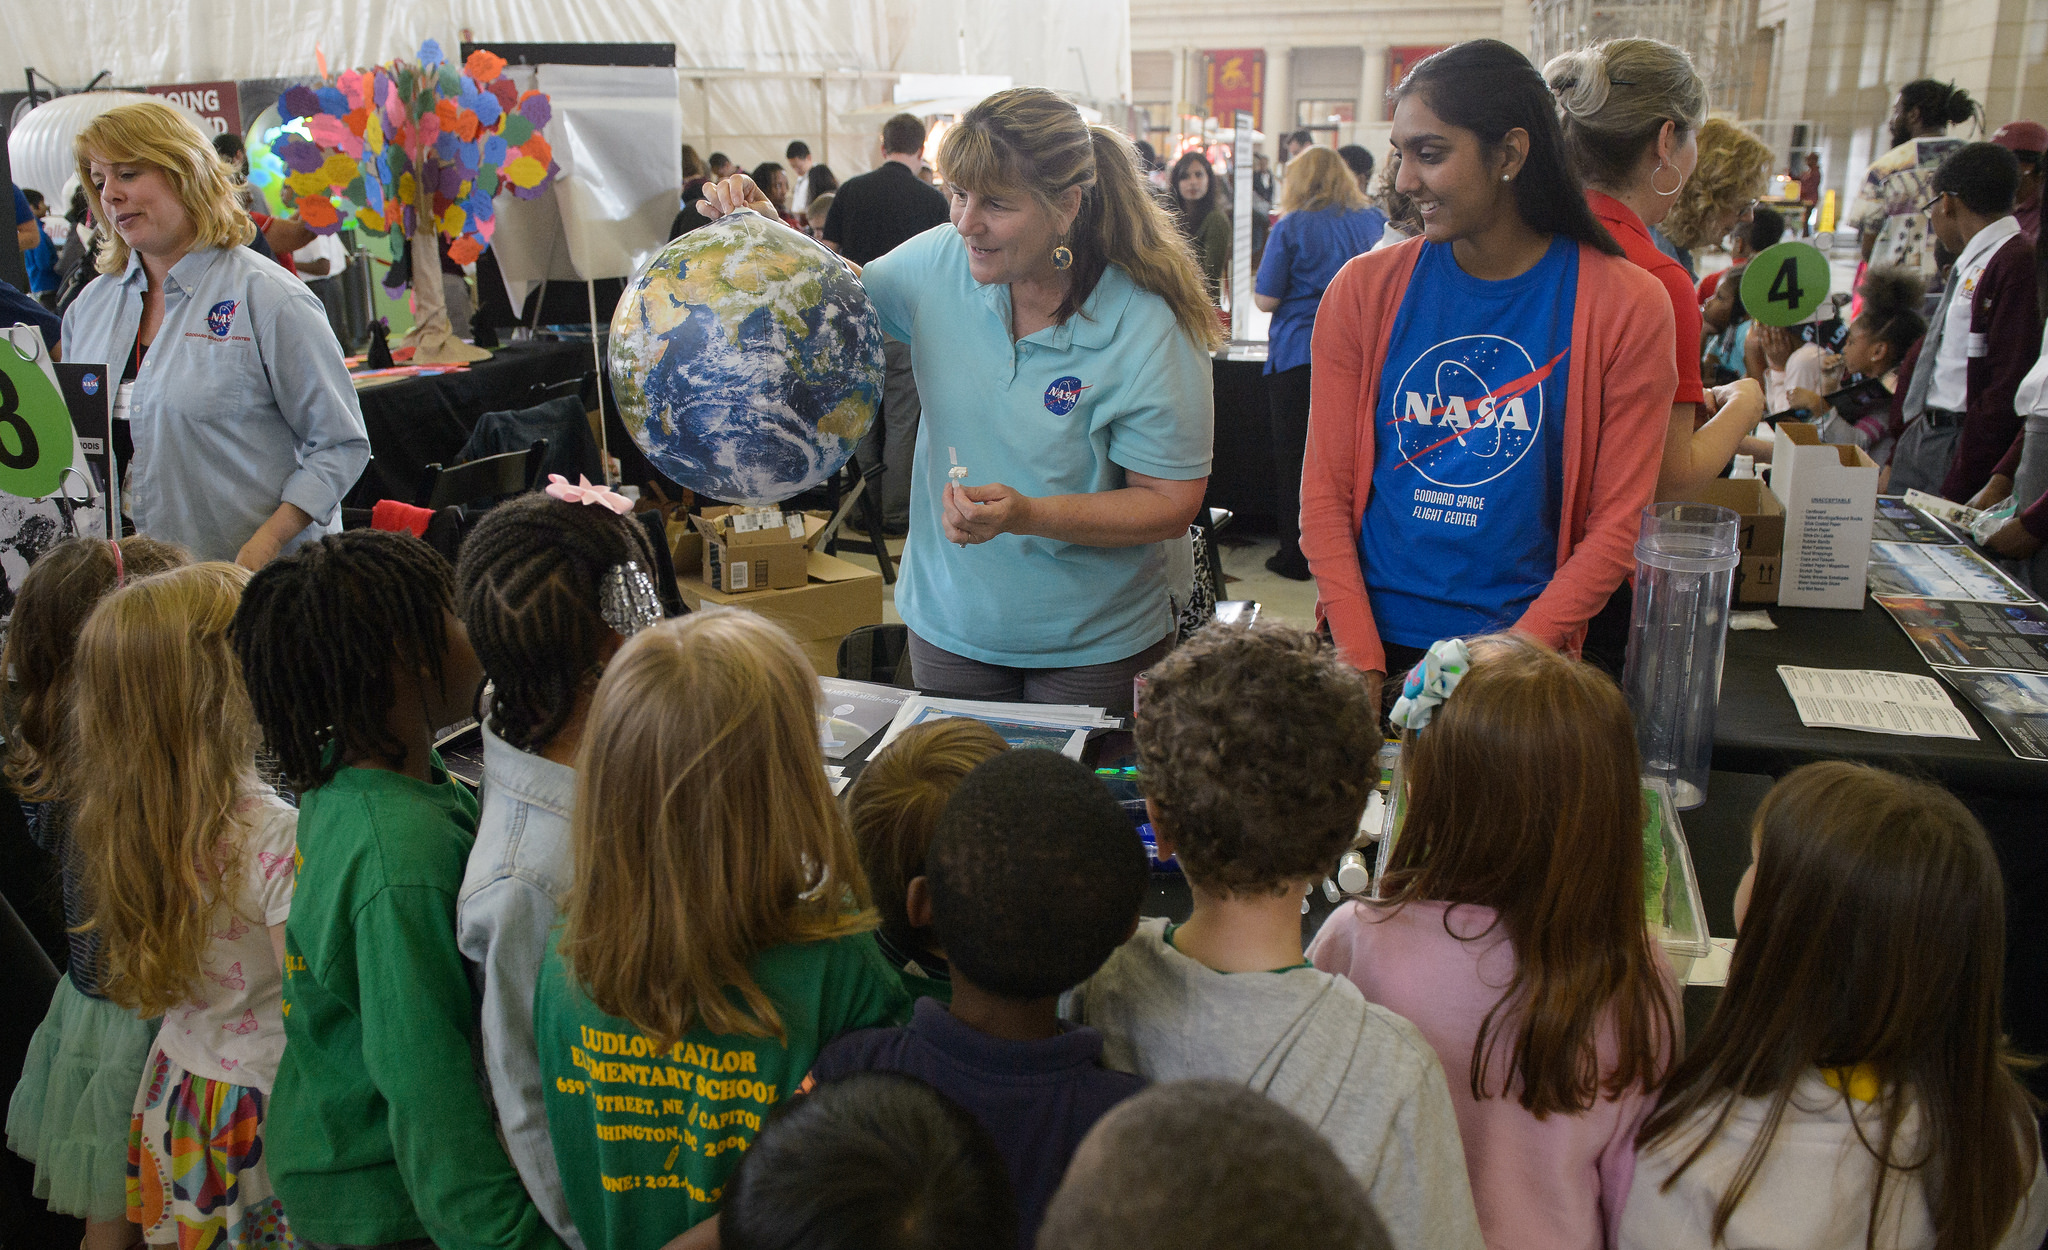 Visitors explore the exhibits at NASA's Earth Day event at Union Station in Washington, DC, Friday, April 22, 2016. 